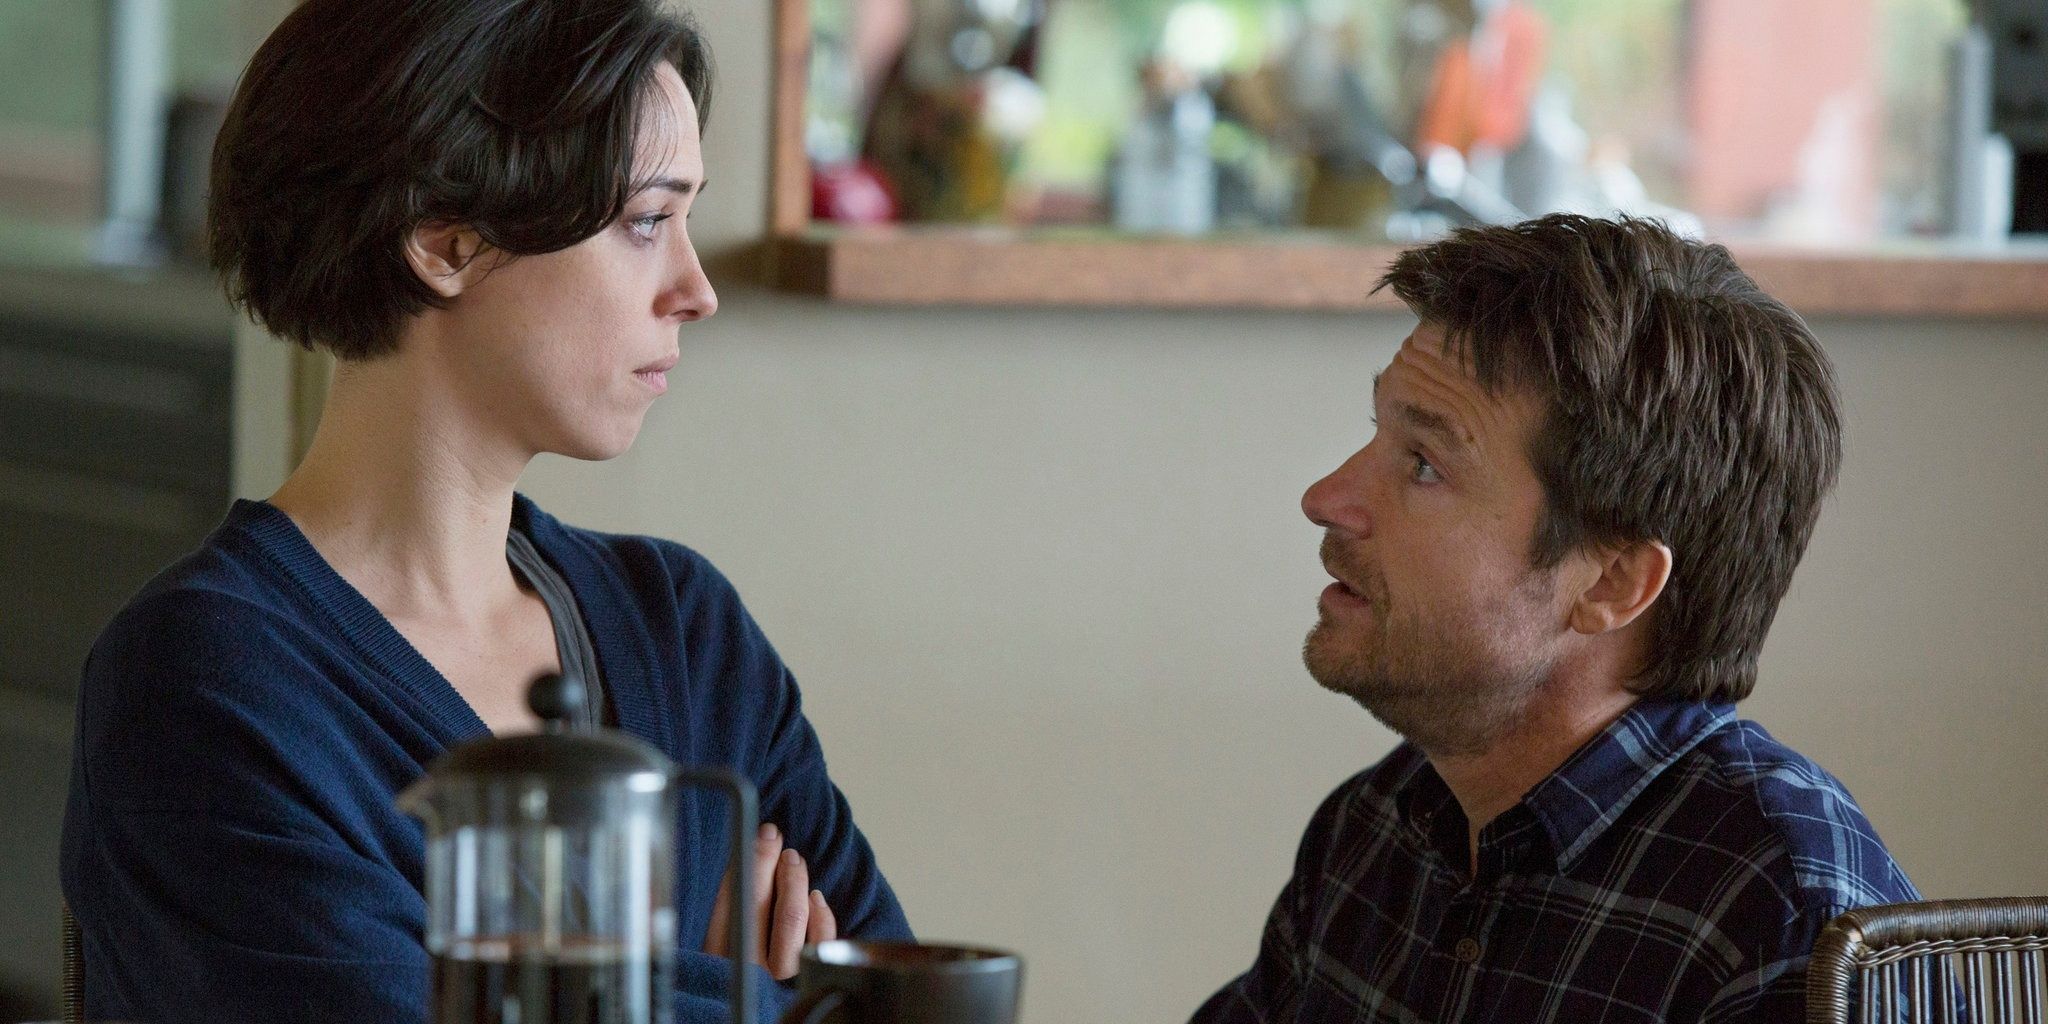 Jason Batemen on his knees talking to Rebecca Hall at the dining table in The Gift